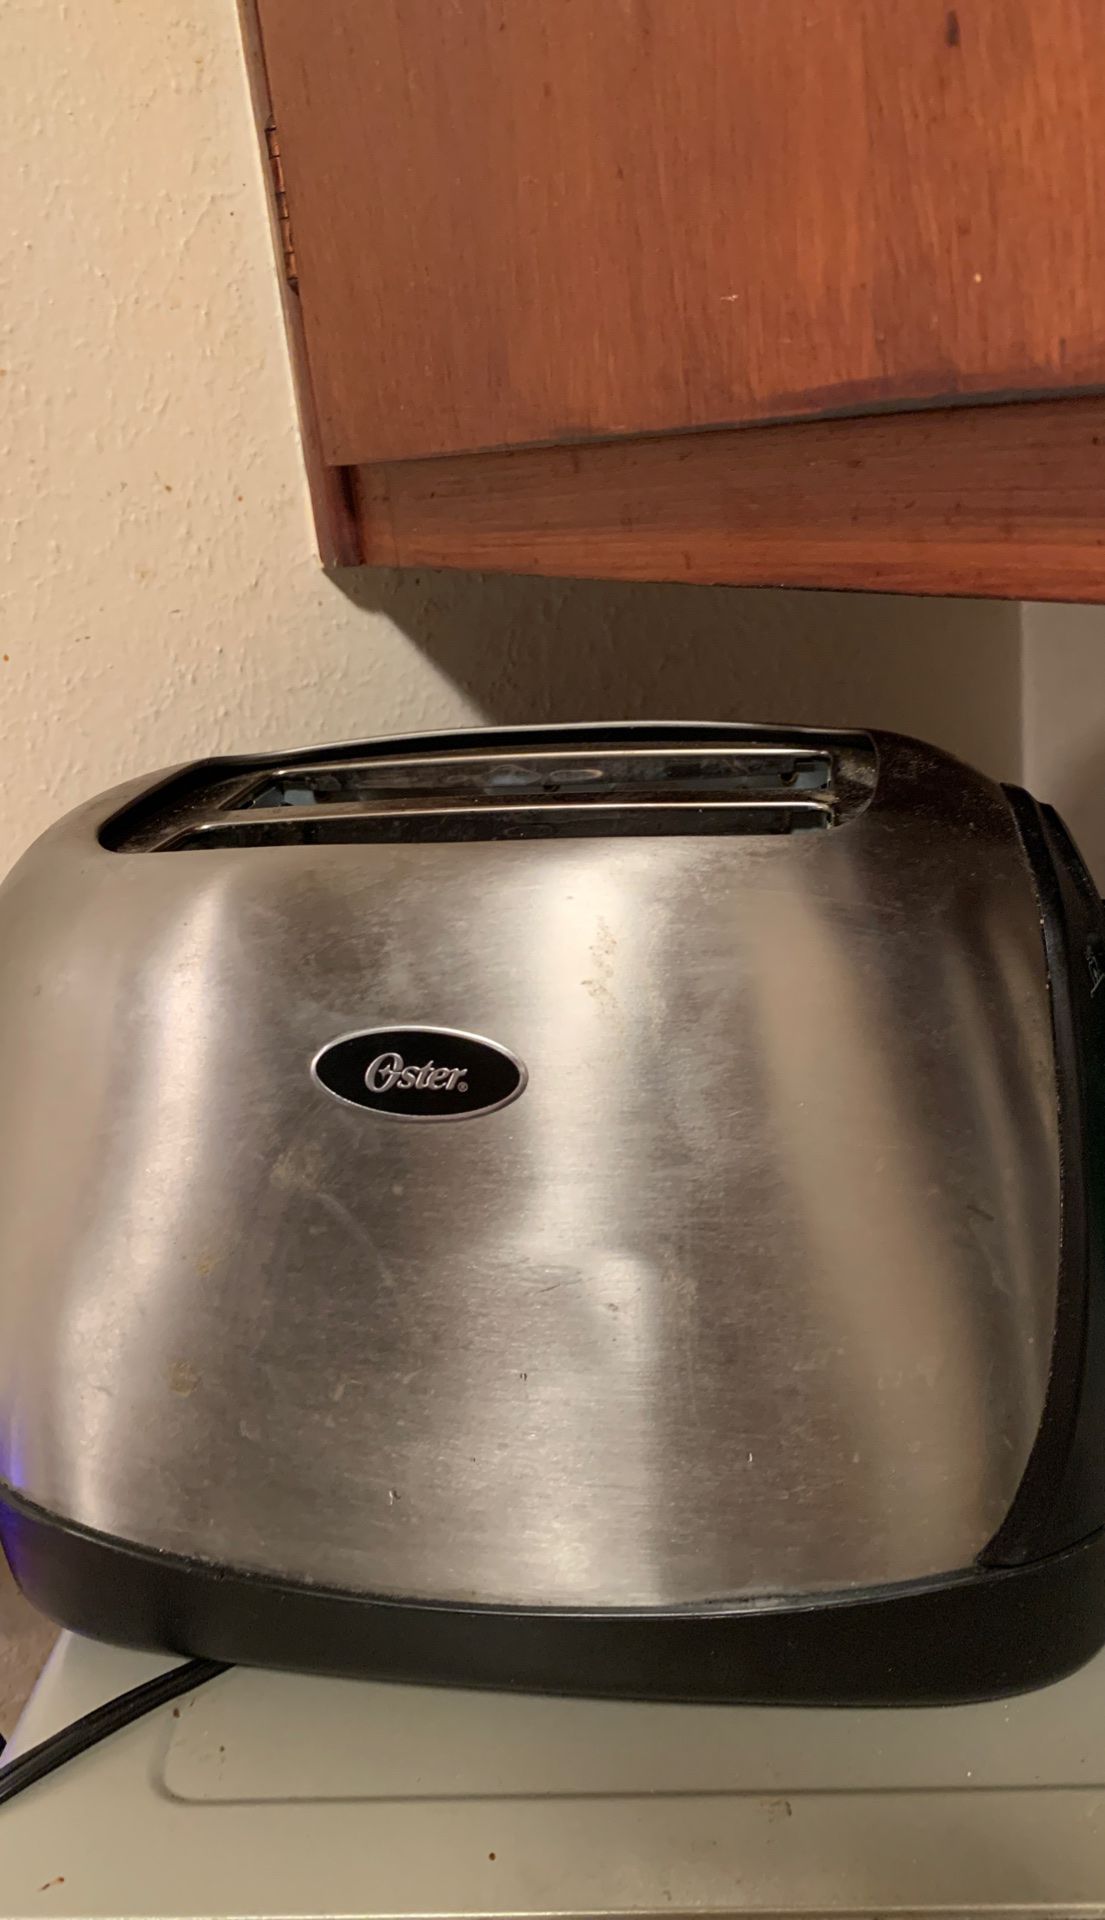 Black & Stainless Steel Toaster. Don’t Need